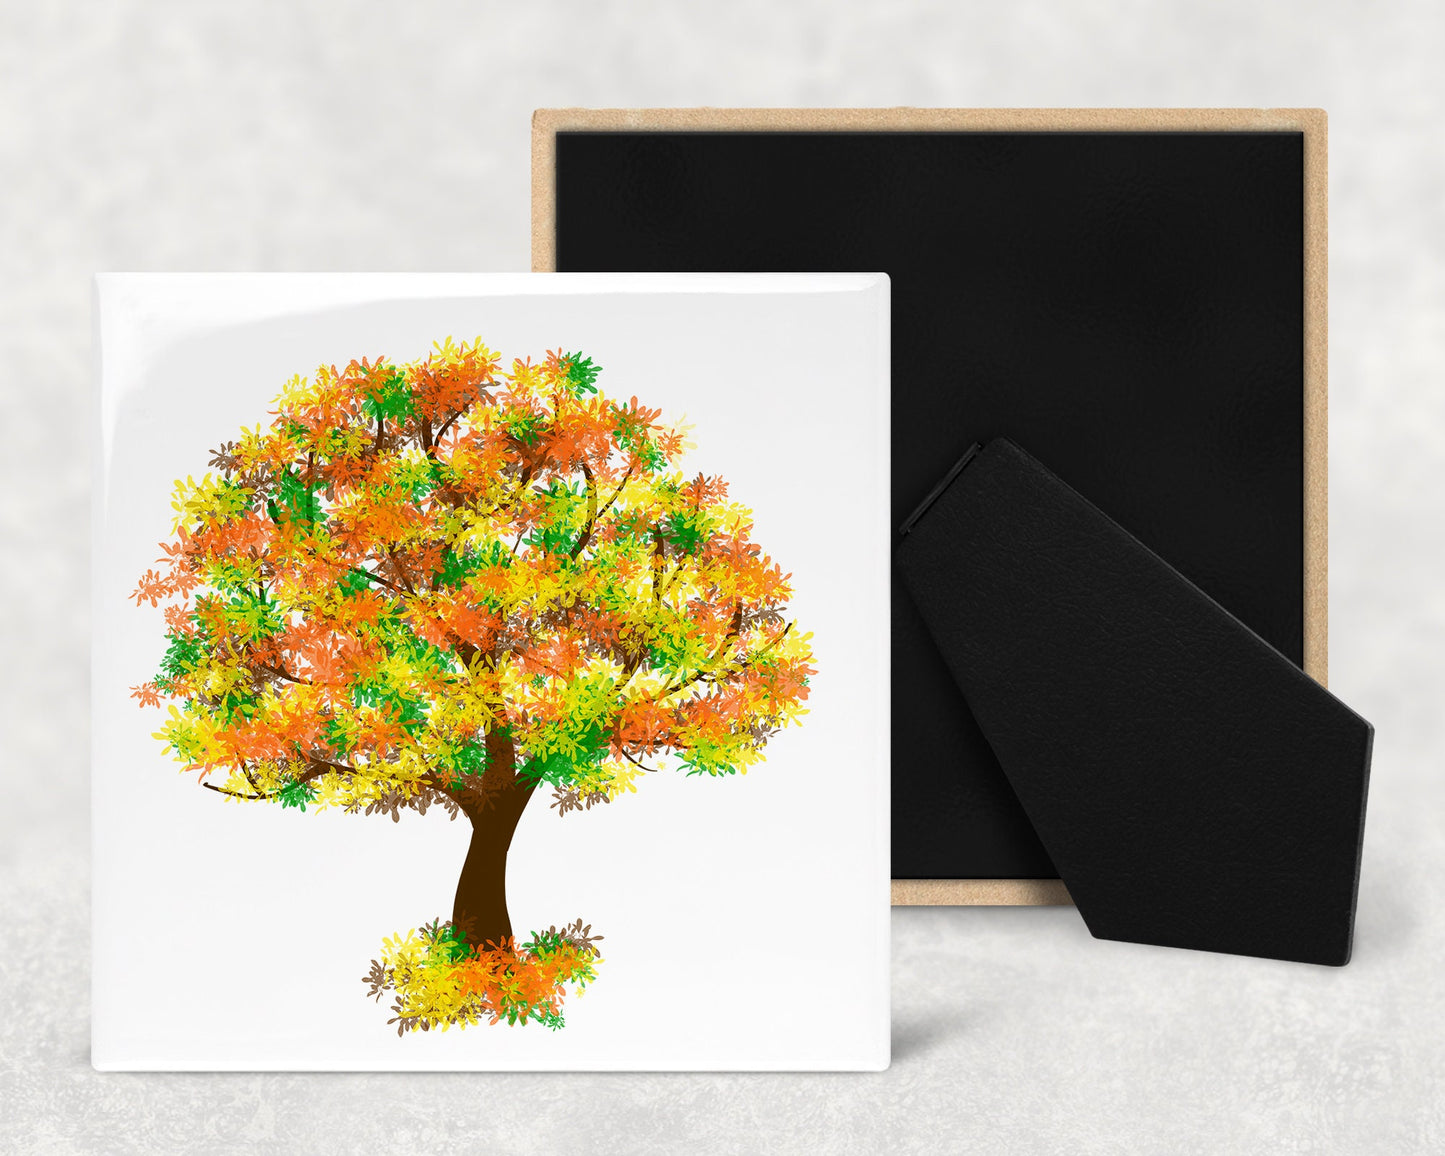 Autumn Tree Fall Colors Art Decorative Ceramic Tile with Optional Easel Back - Available in 3 Sizes